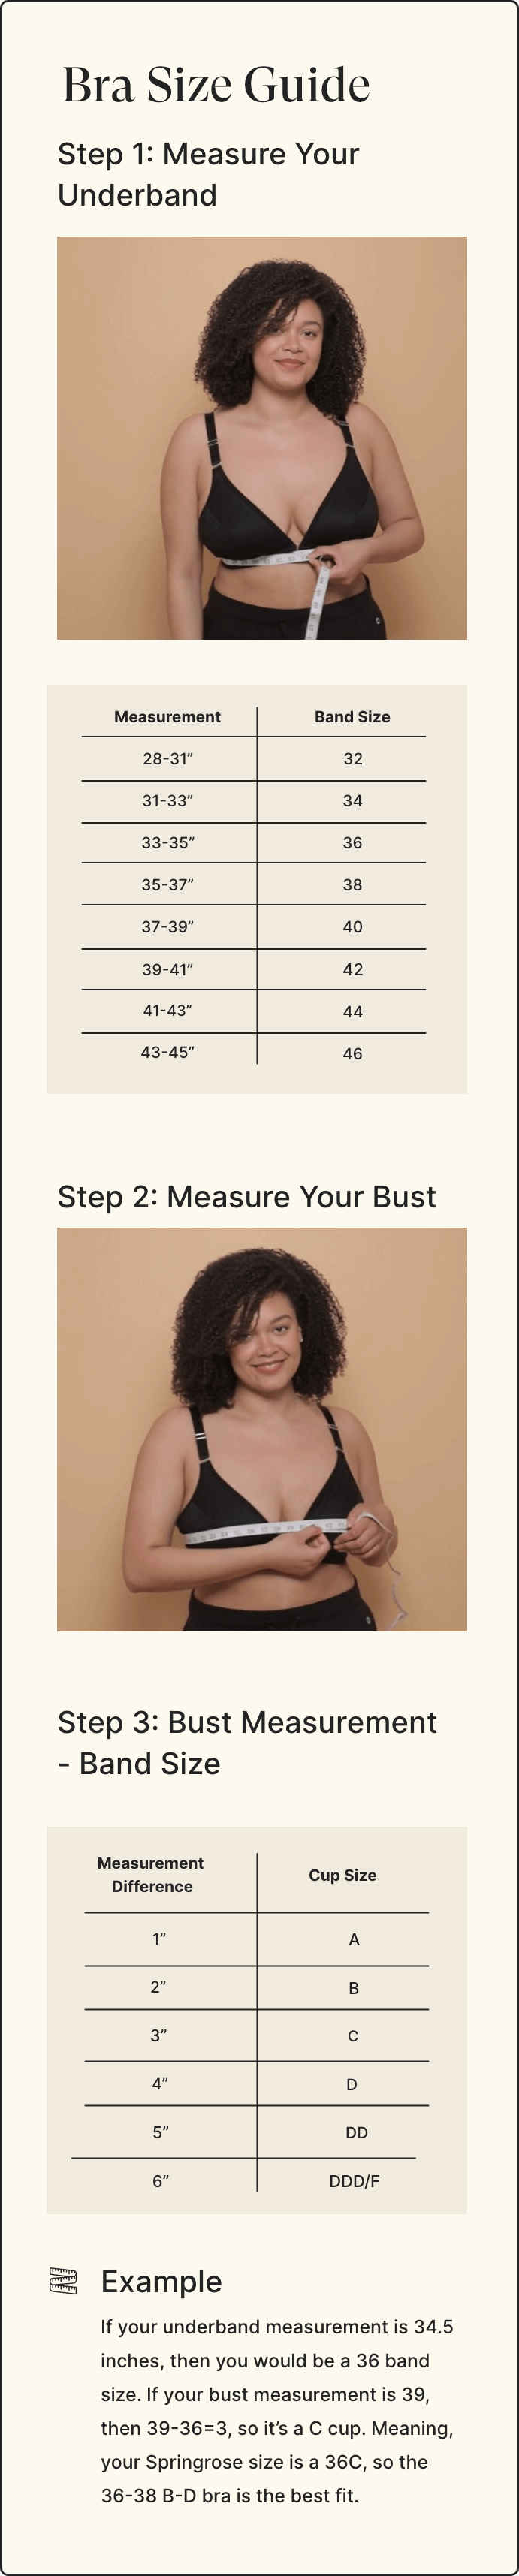 Springrose adaptive bra with velcro front closure sizing guide